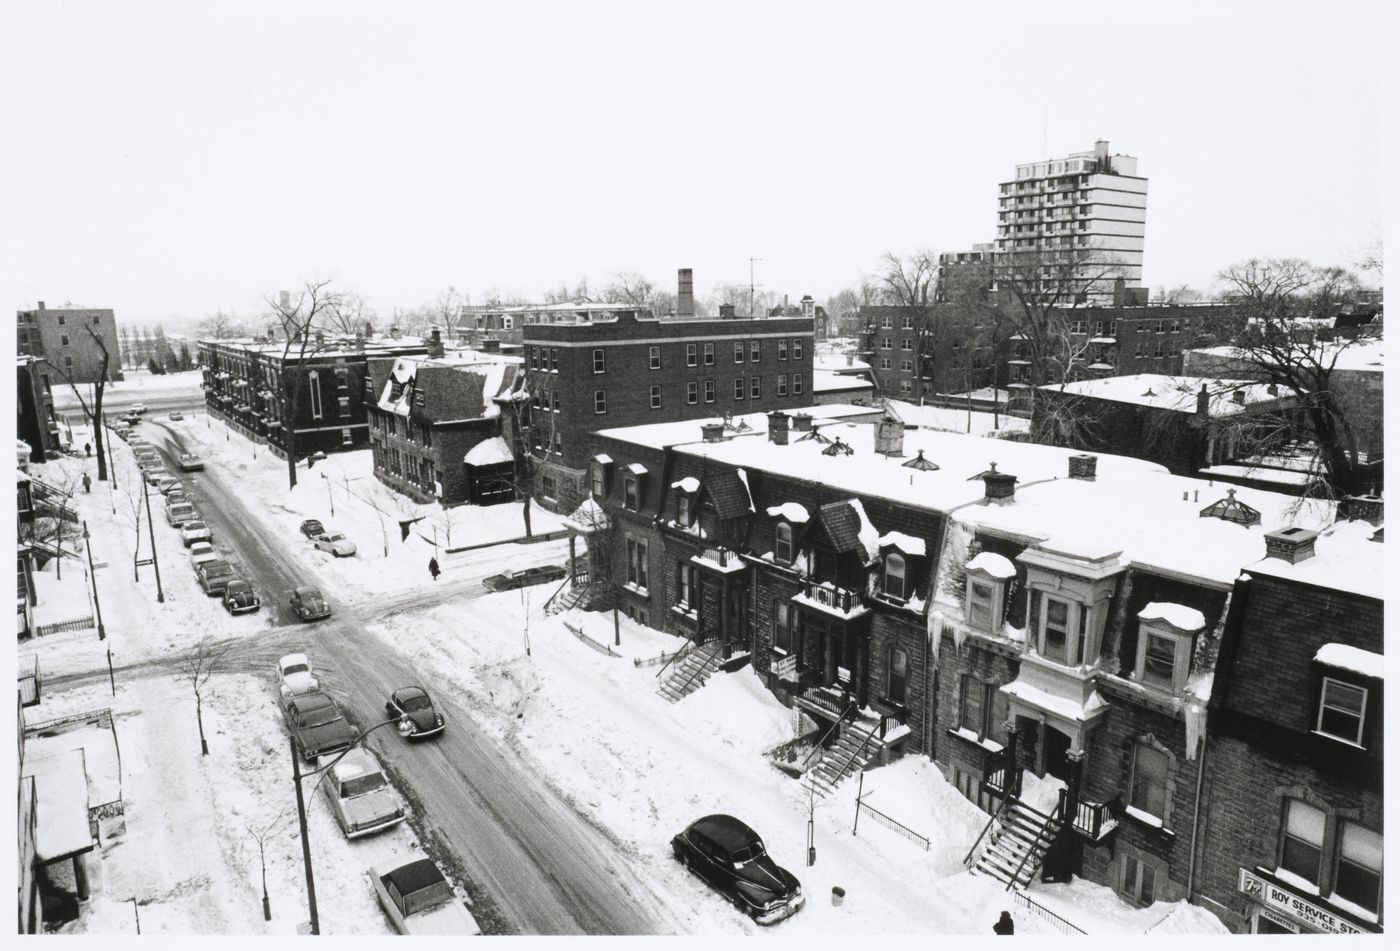 View of rue Saint-Marc and rue Baile showing the roof of Shaughnessy House in the background, Montréal, Québec